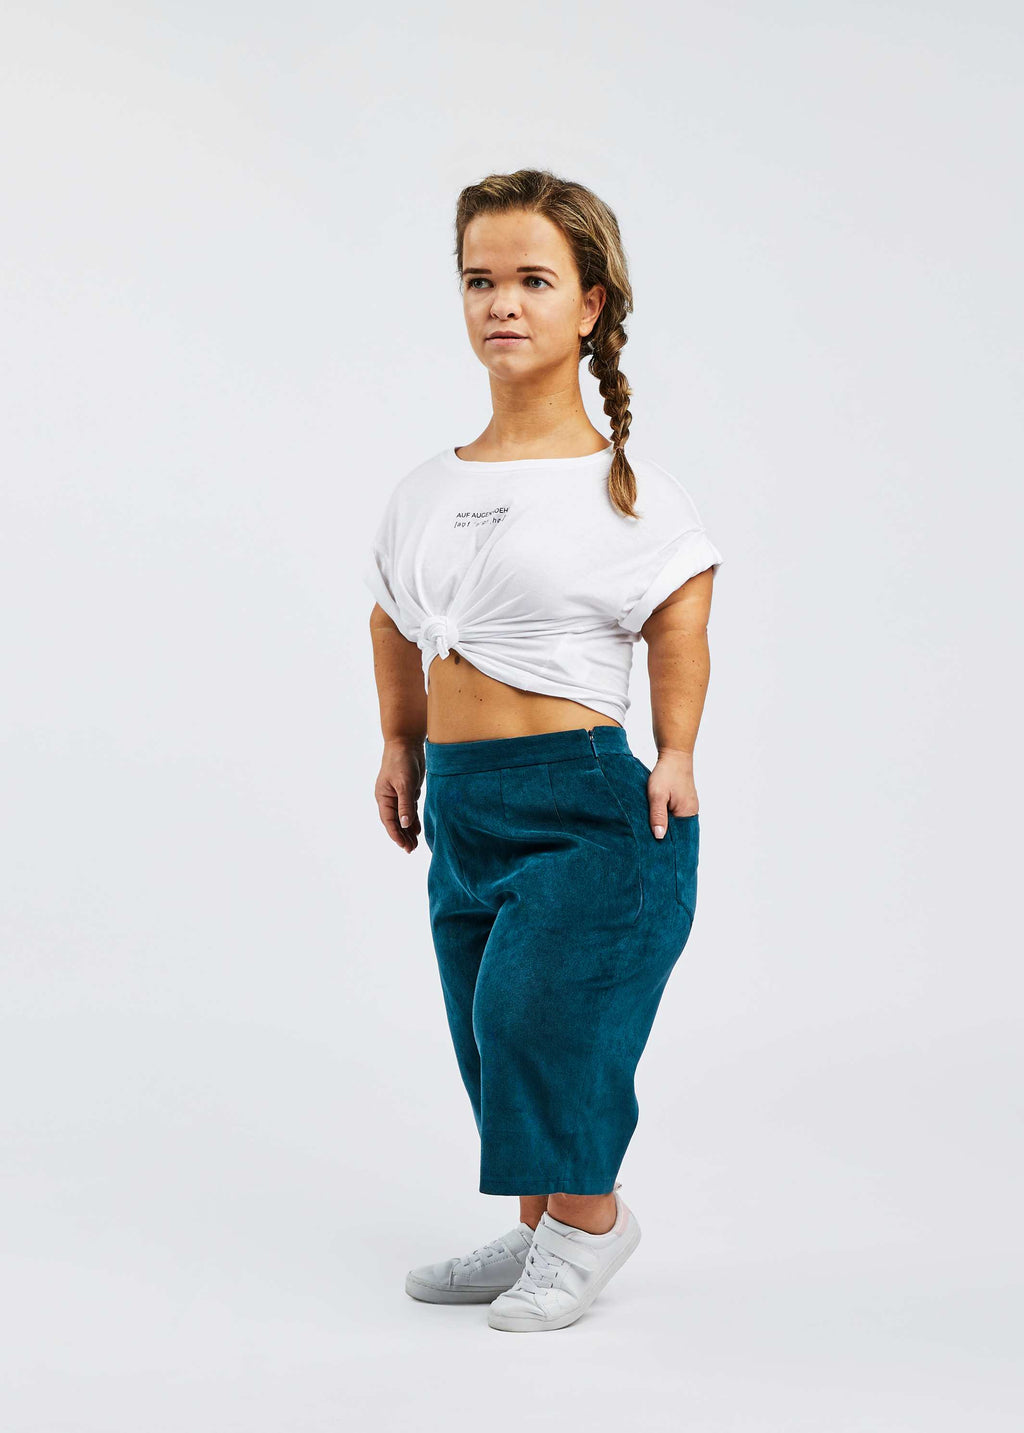 woman with dwarfism wearing blue corduroy culottes and white shirt